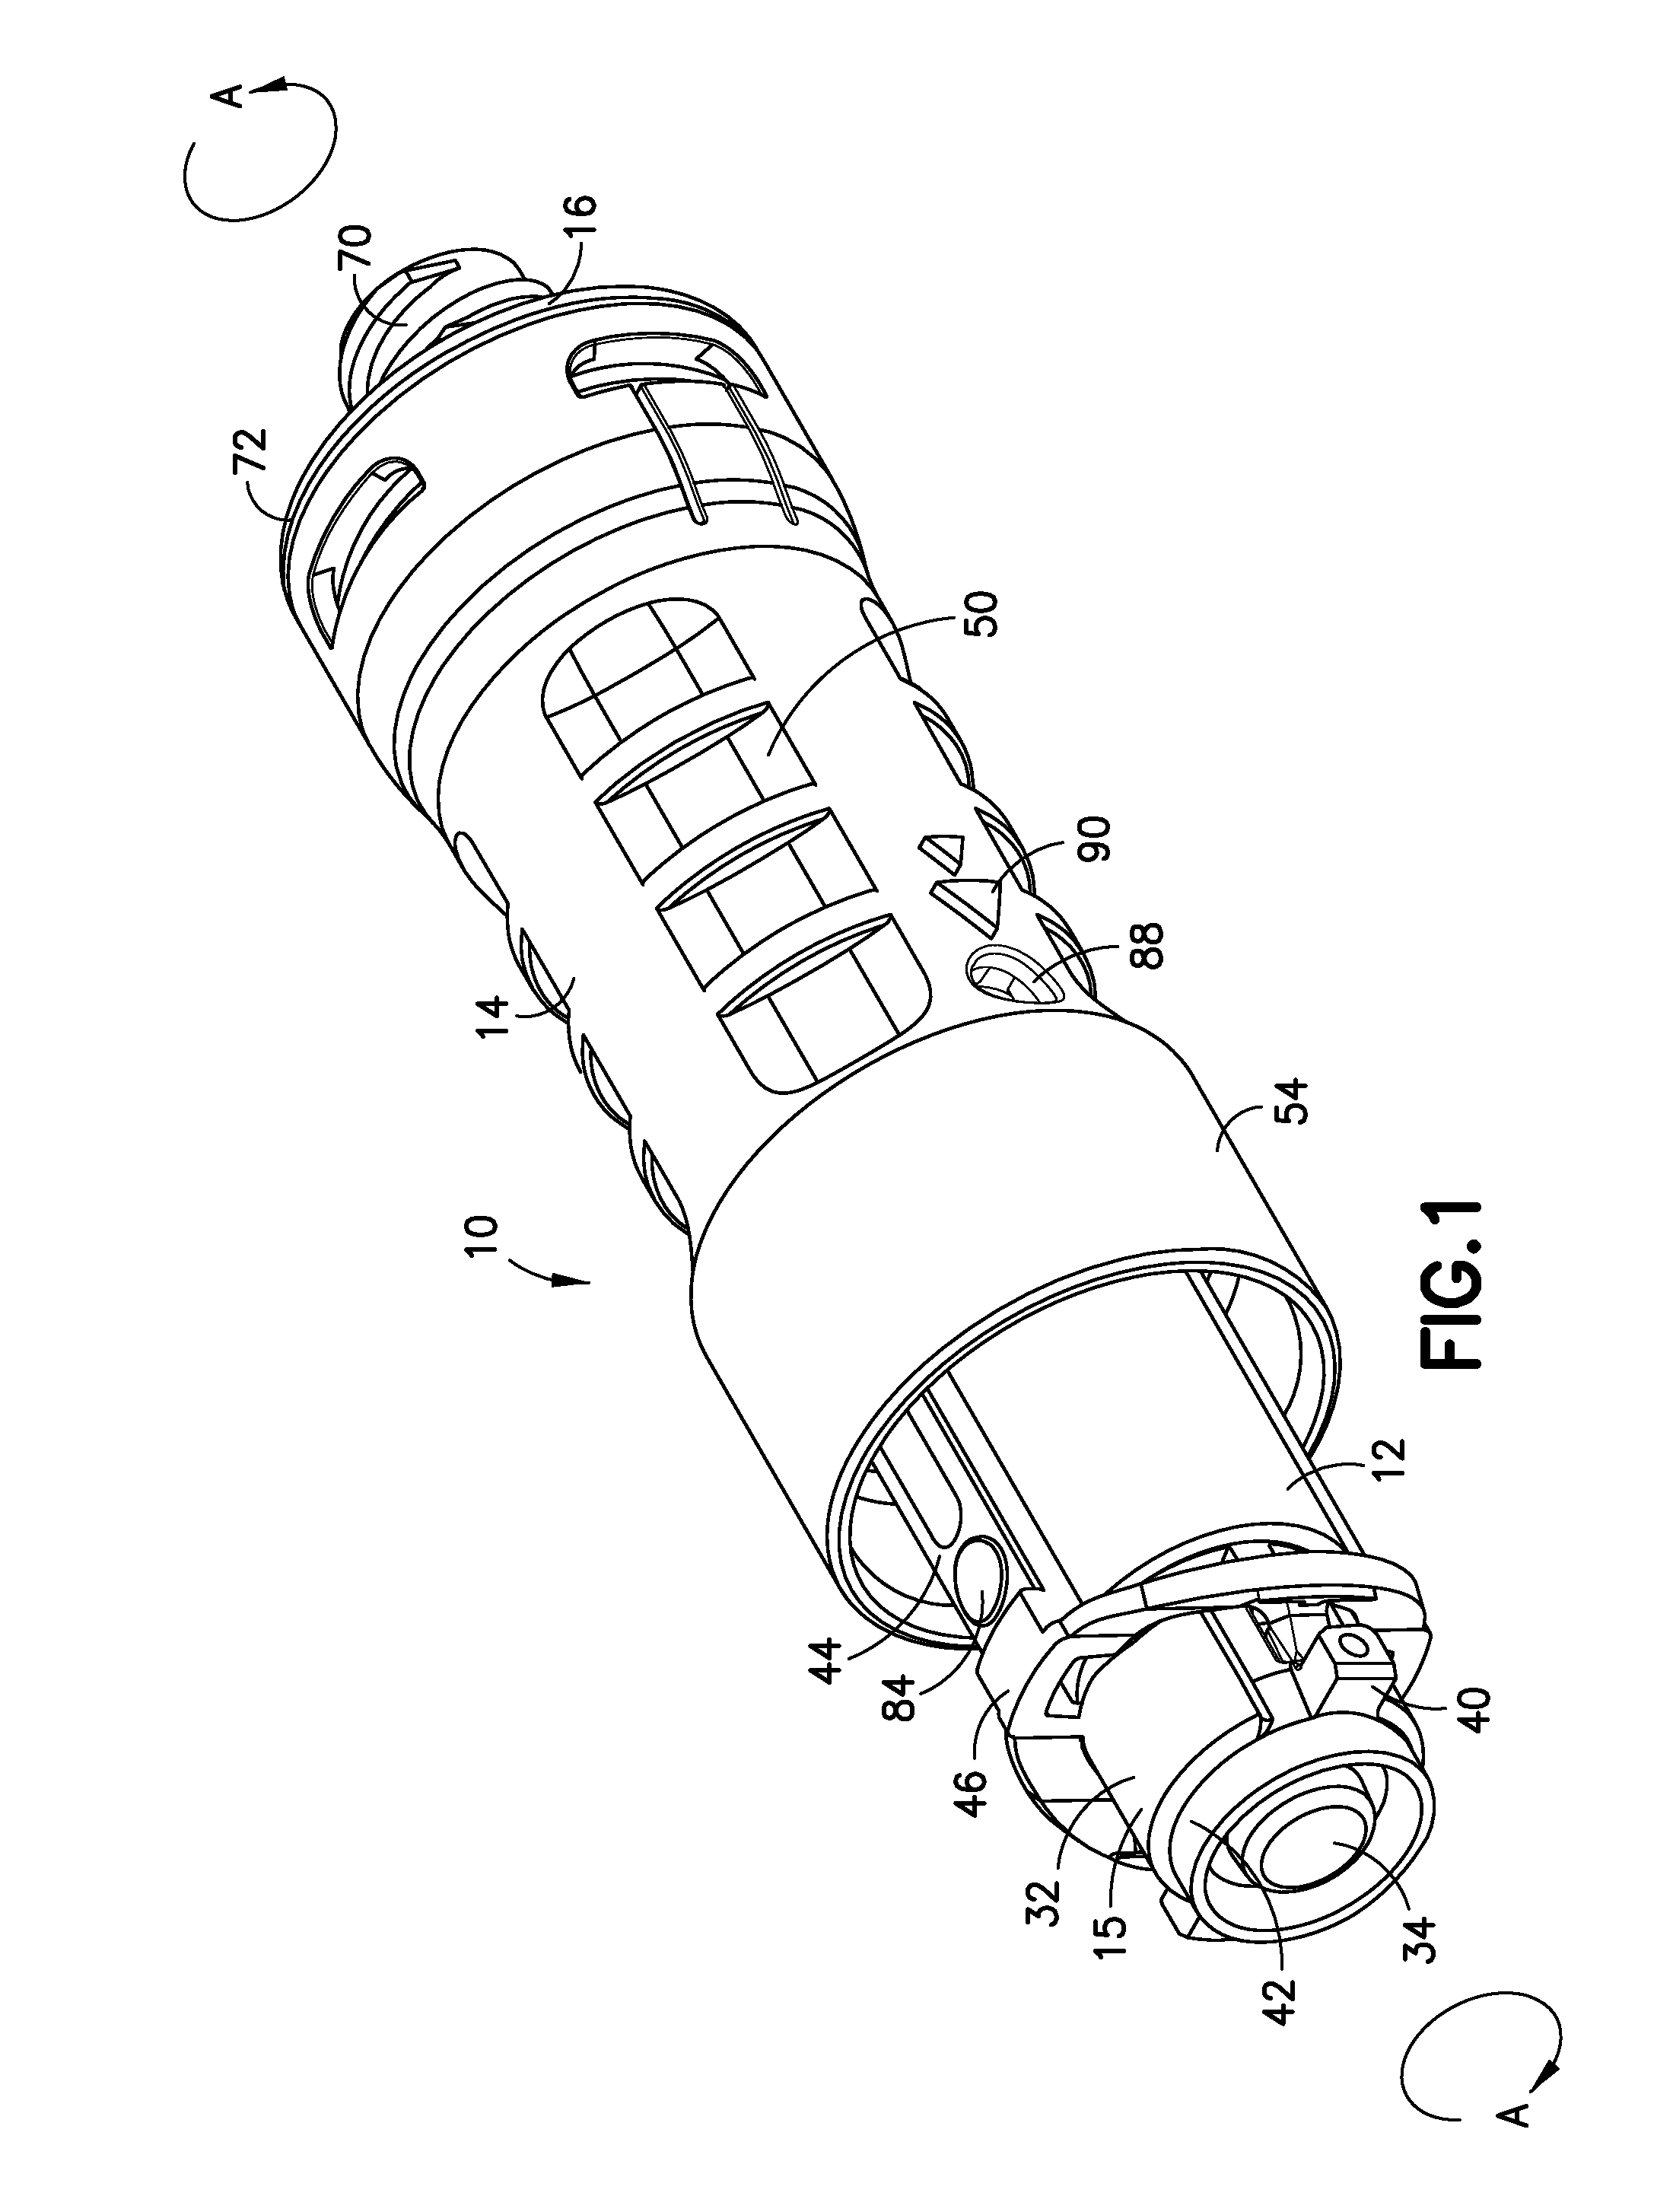 Connector for Fluid Communication